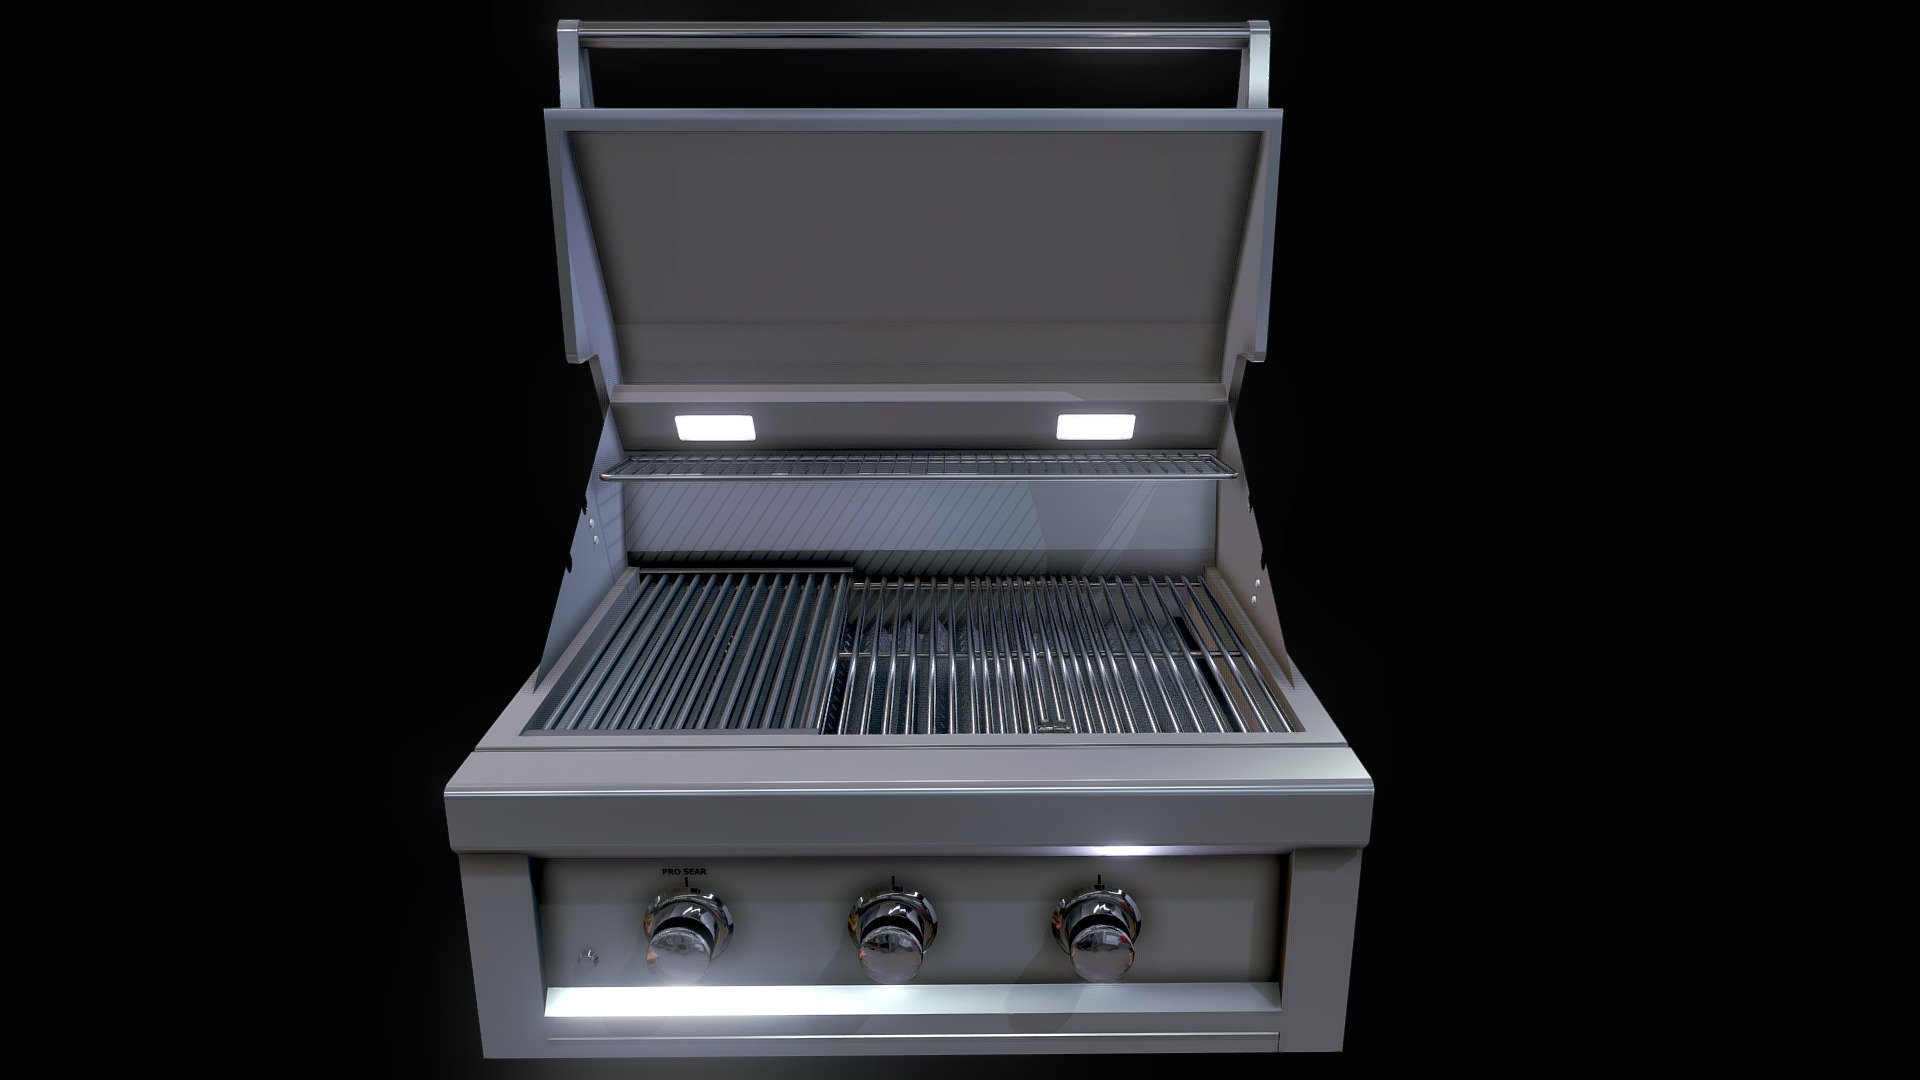 Sunstone Ruby Series 36 4-Burner Pro-Sear Stainless Steel Drop-In Nat –  Grill Collection